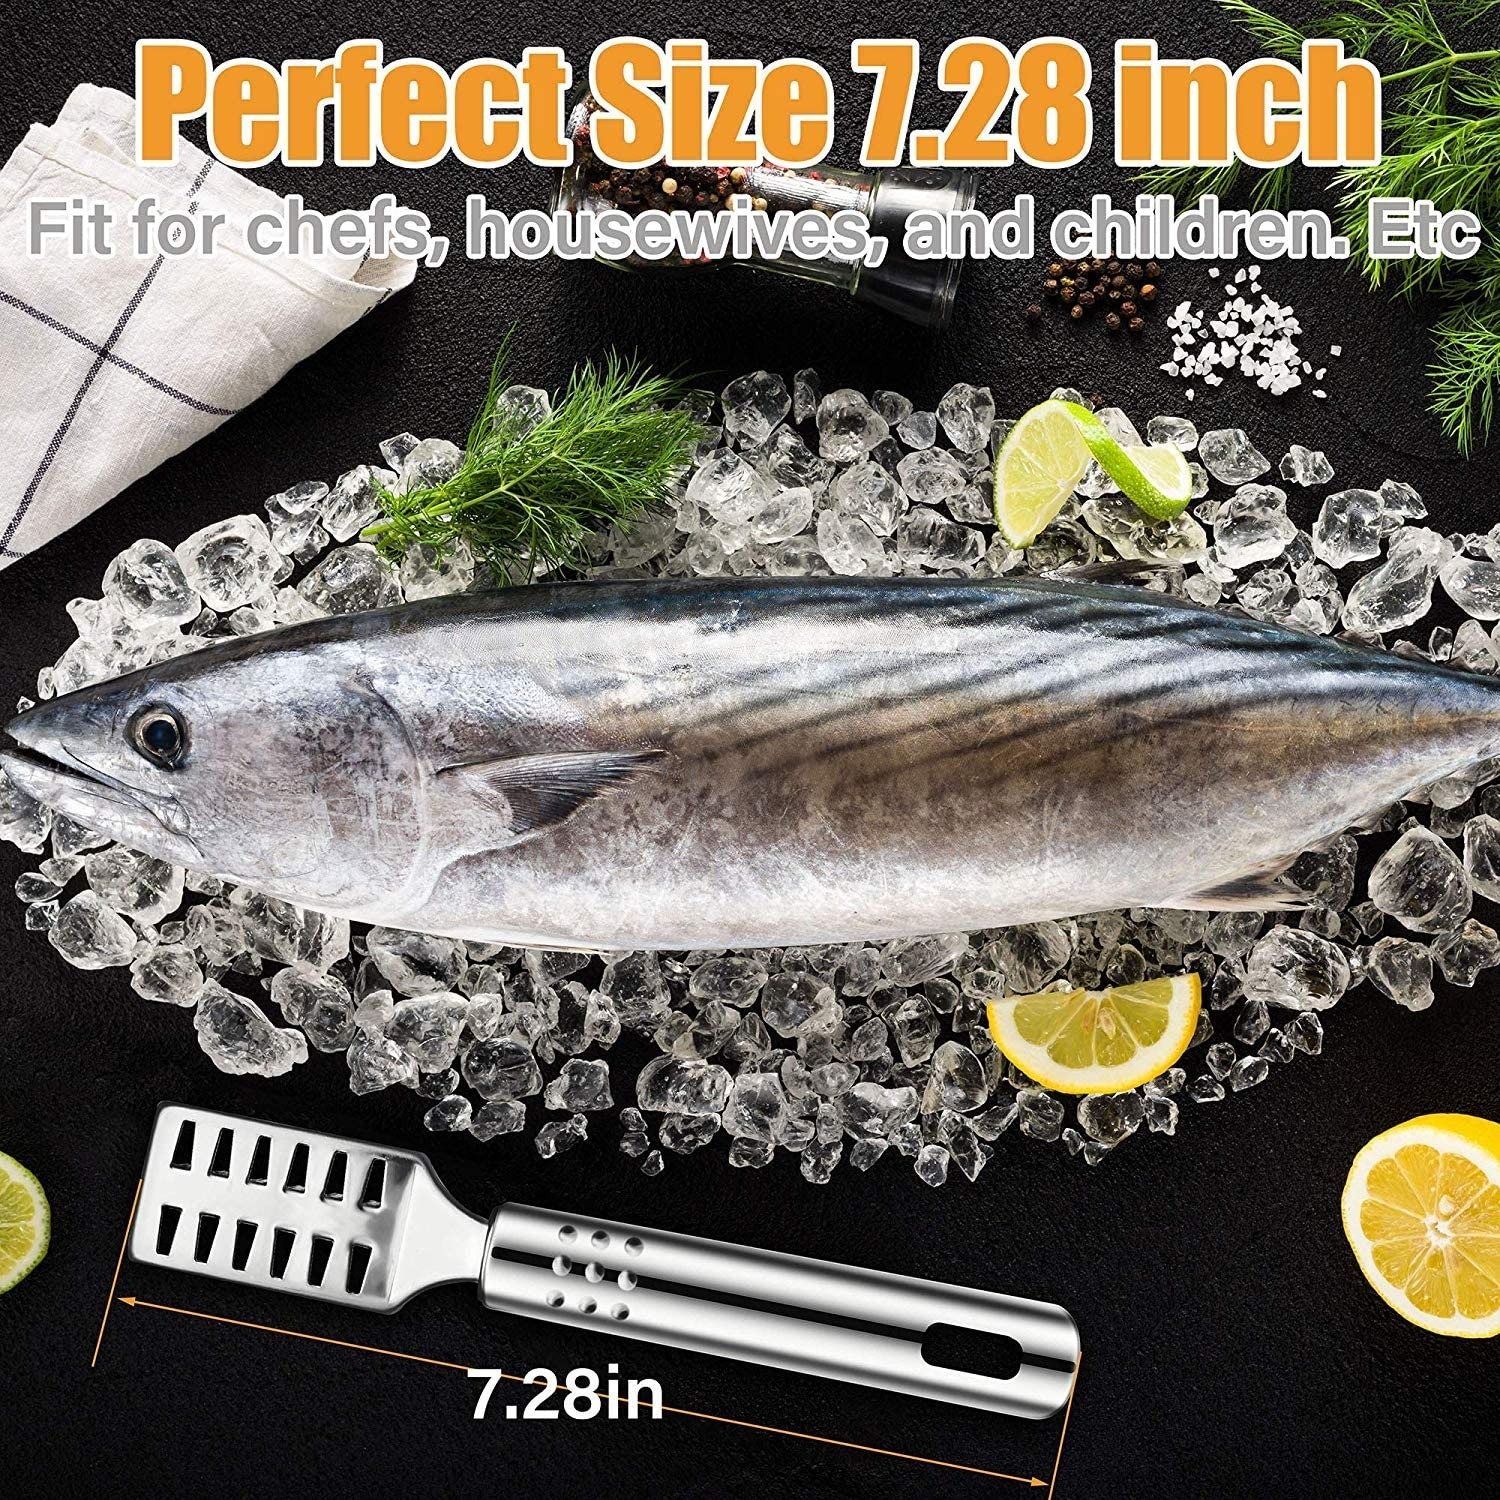 Summer Hot Sale 48% OFF - Stainless Steel Fish Scaler Brush